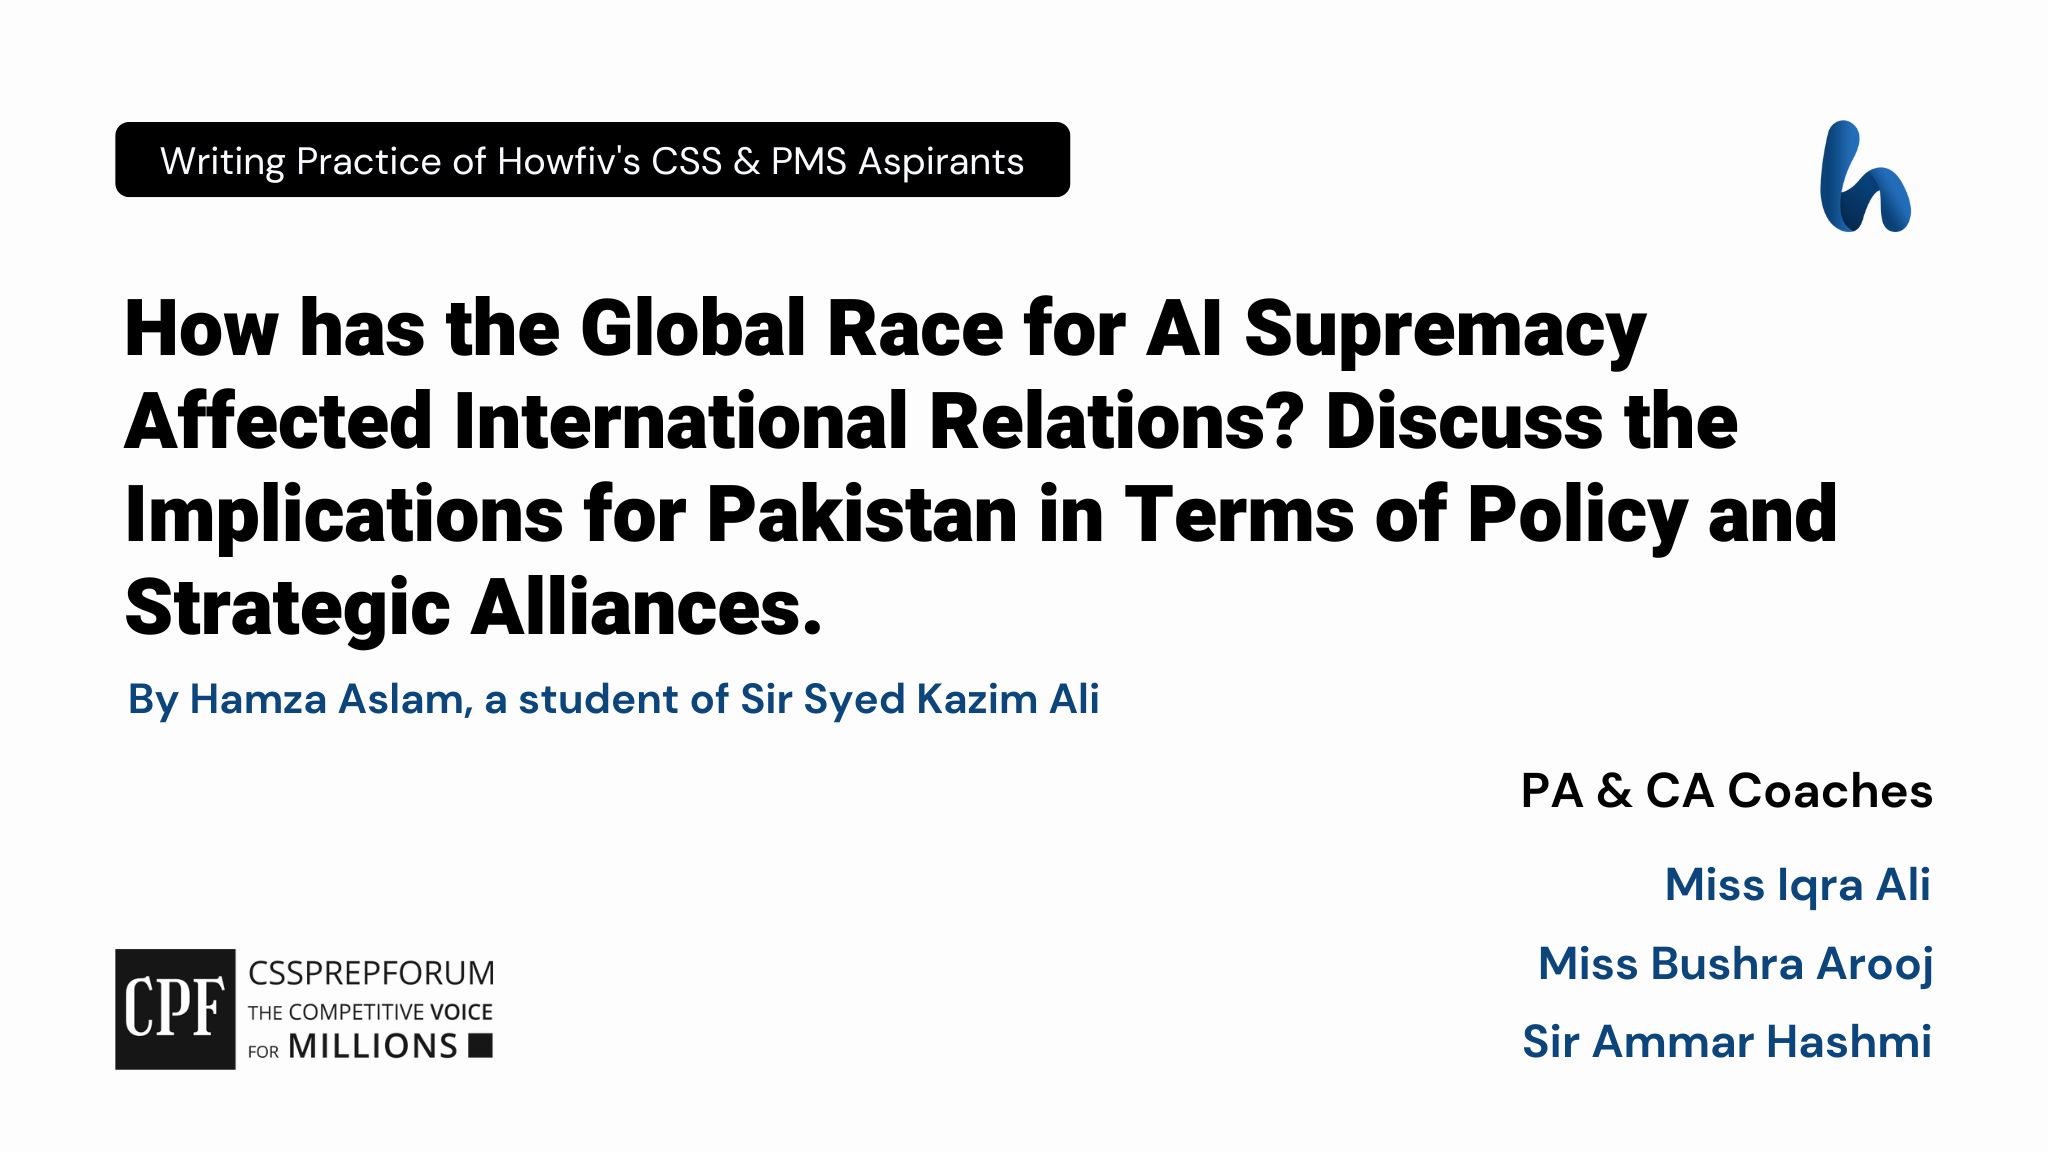 CSS Current Affairs article | Effects of Global AI Race on International Relations | is written by Hamza Aslam under the supervision of Miss Iqra Ali...